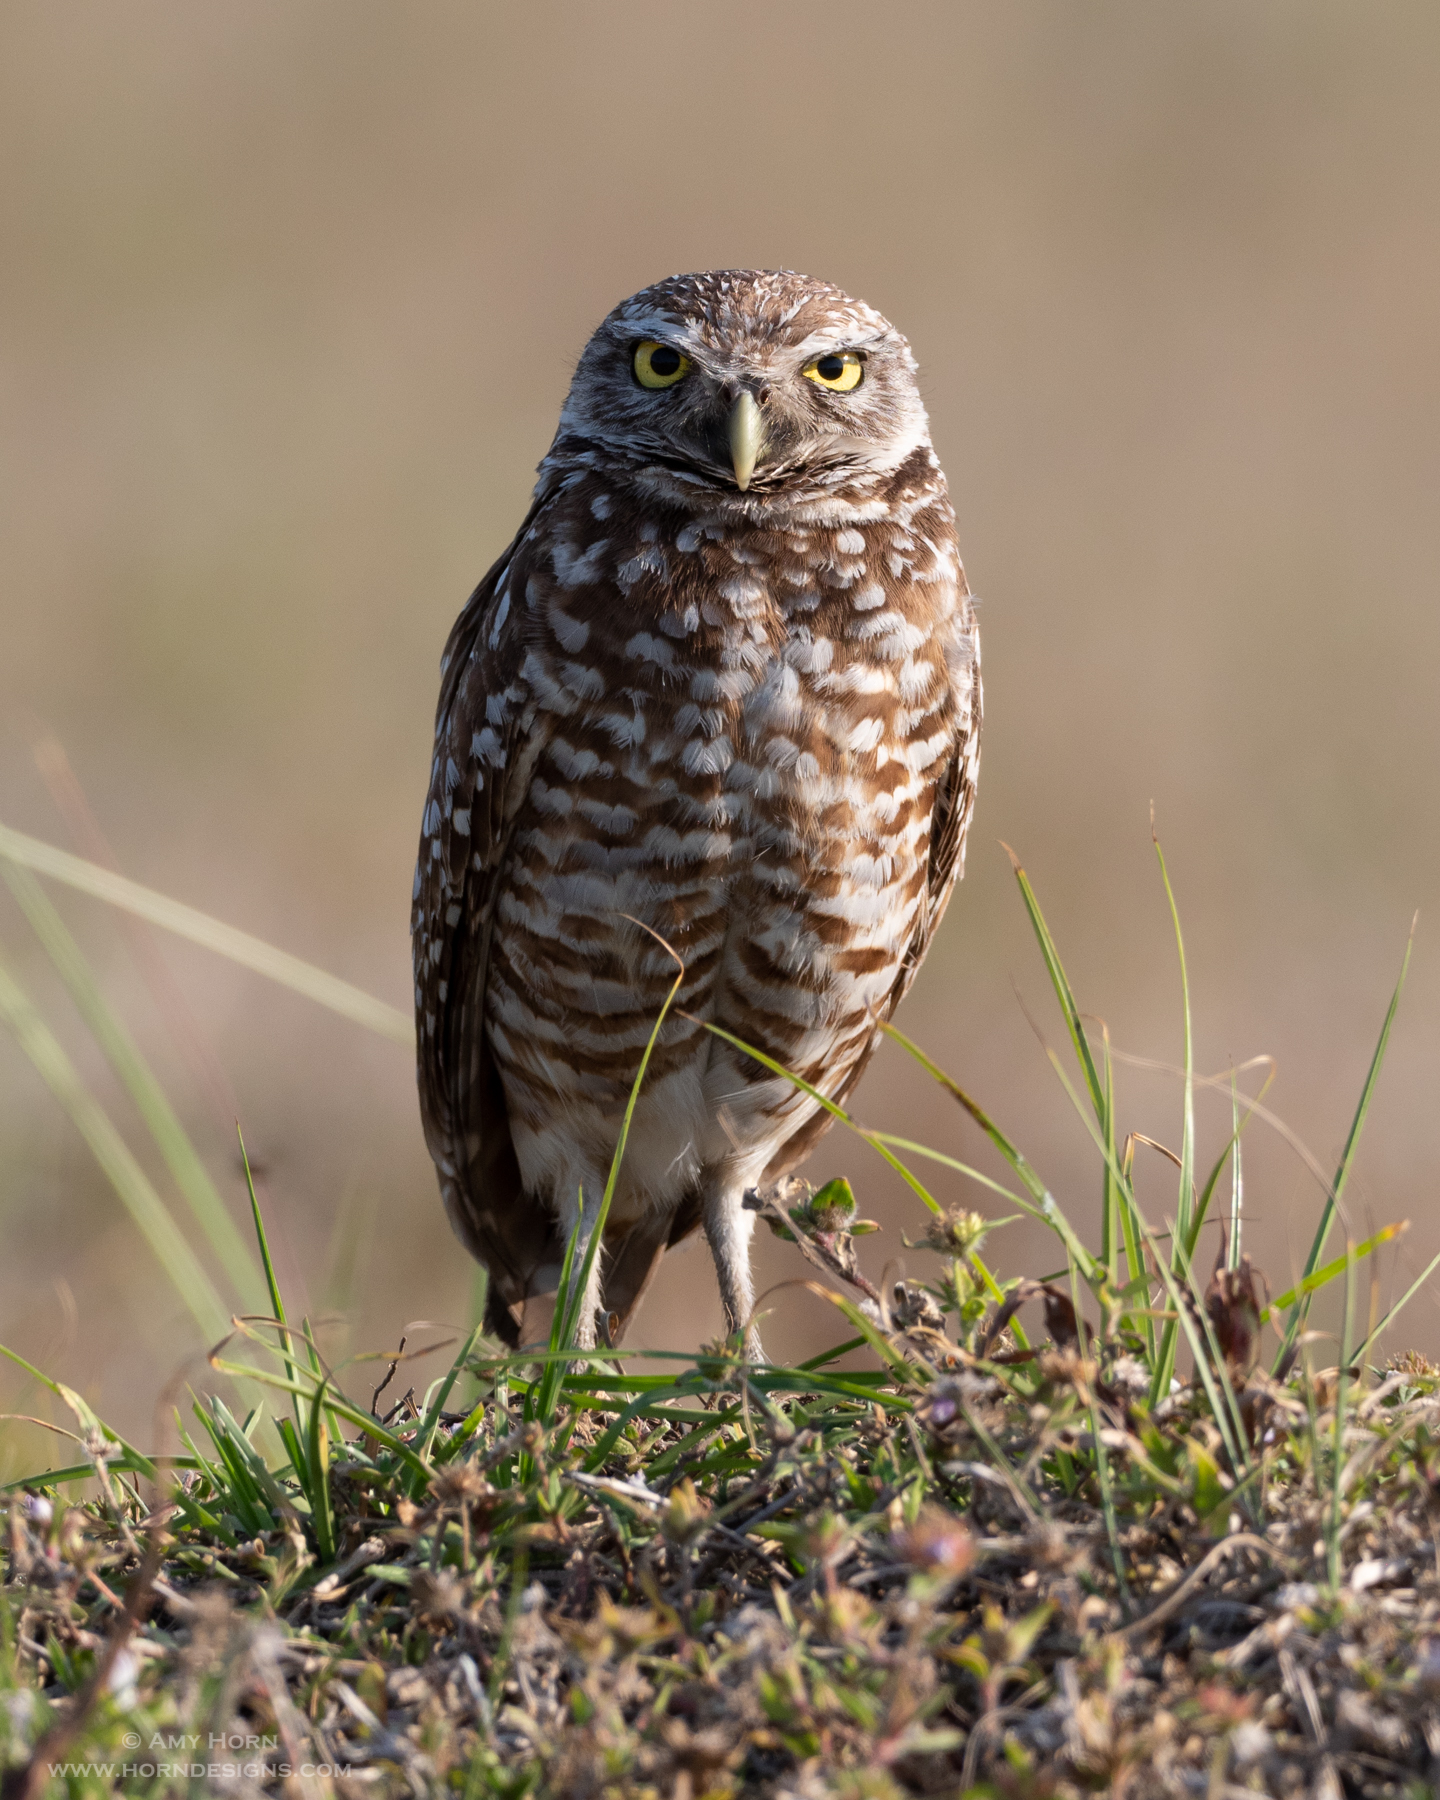 burrowing owl image captured with a tripod